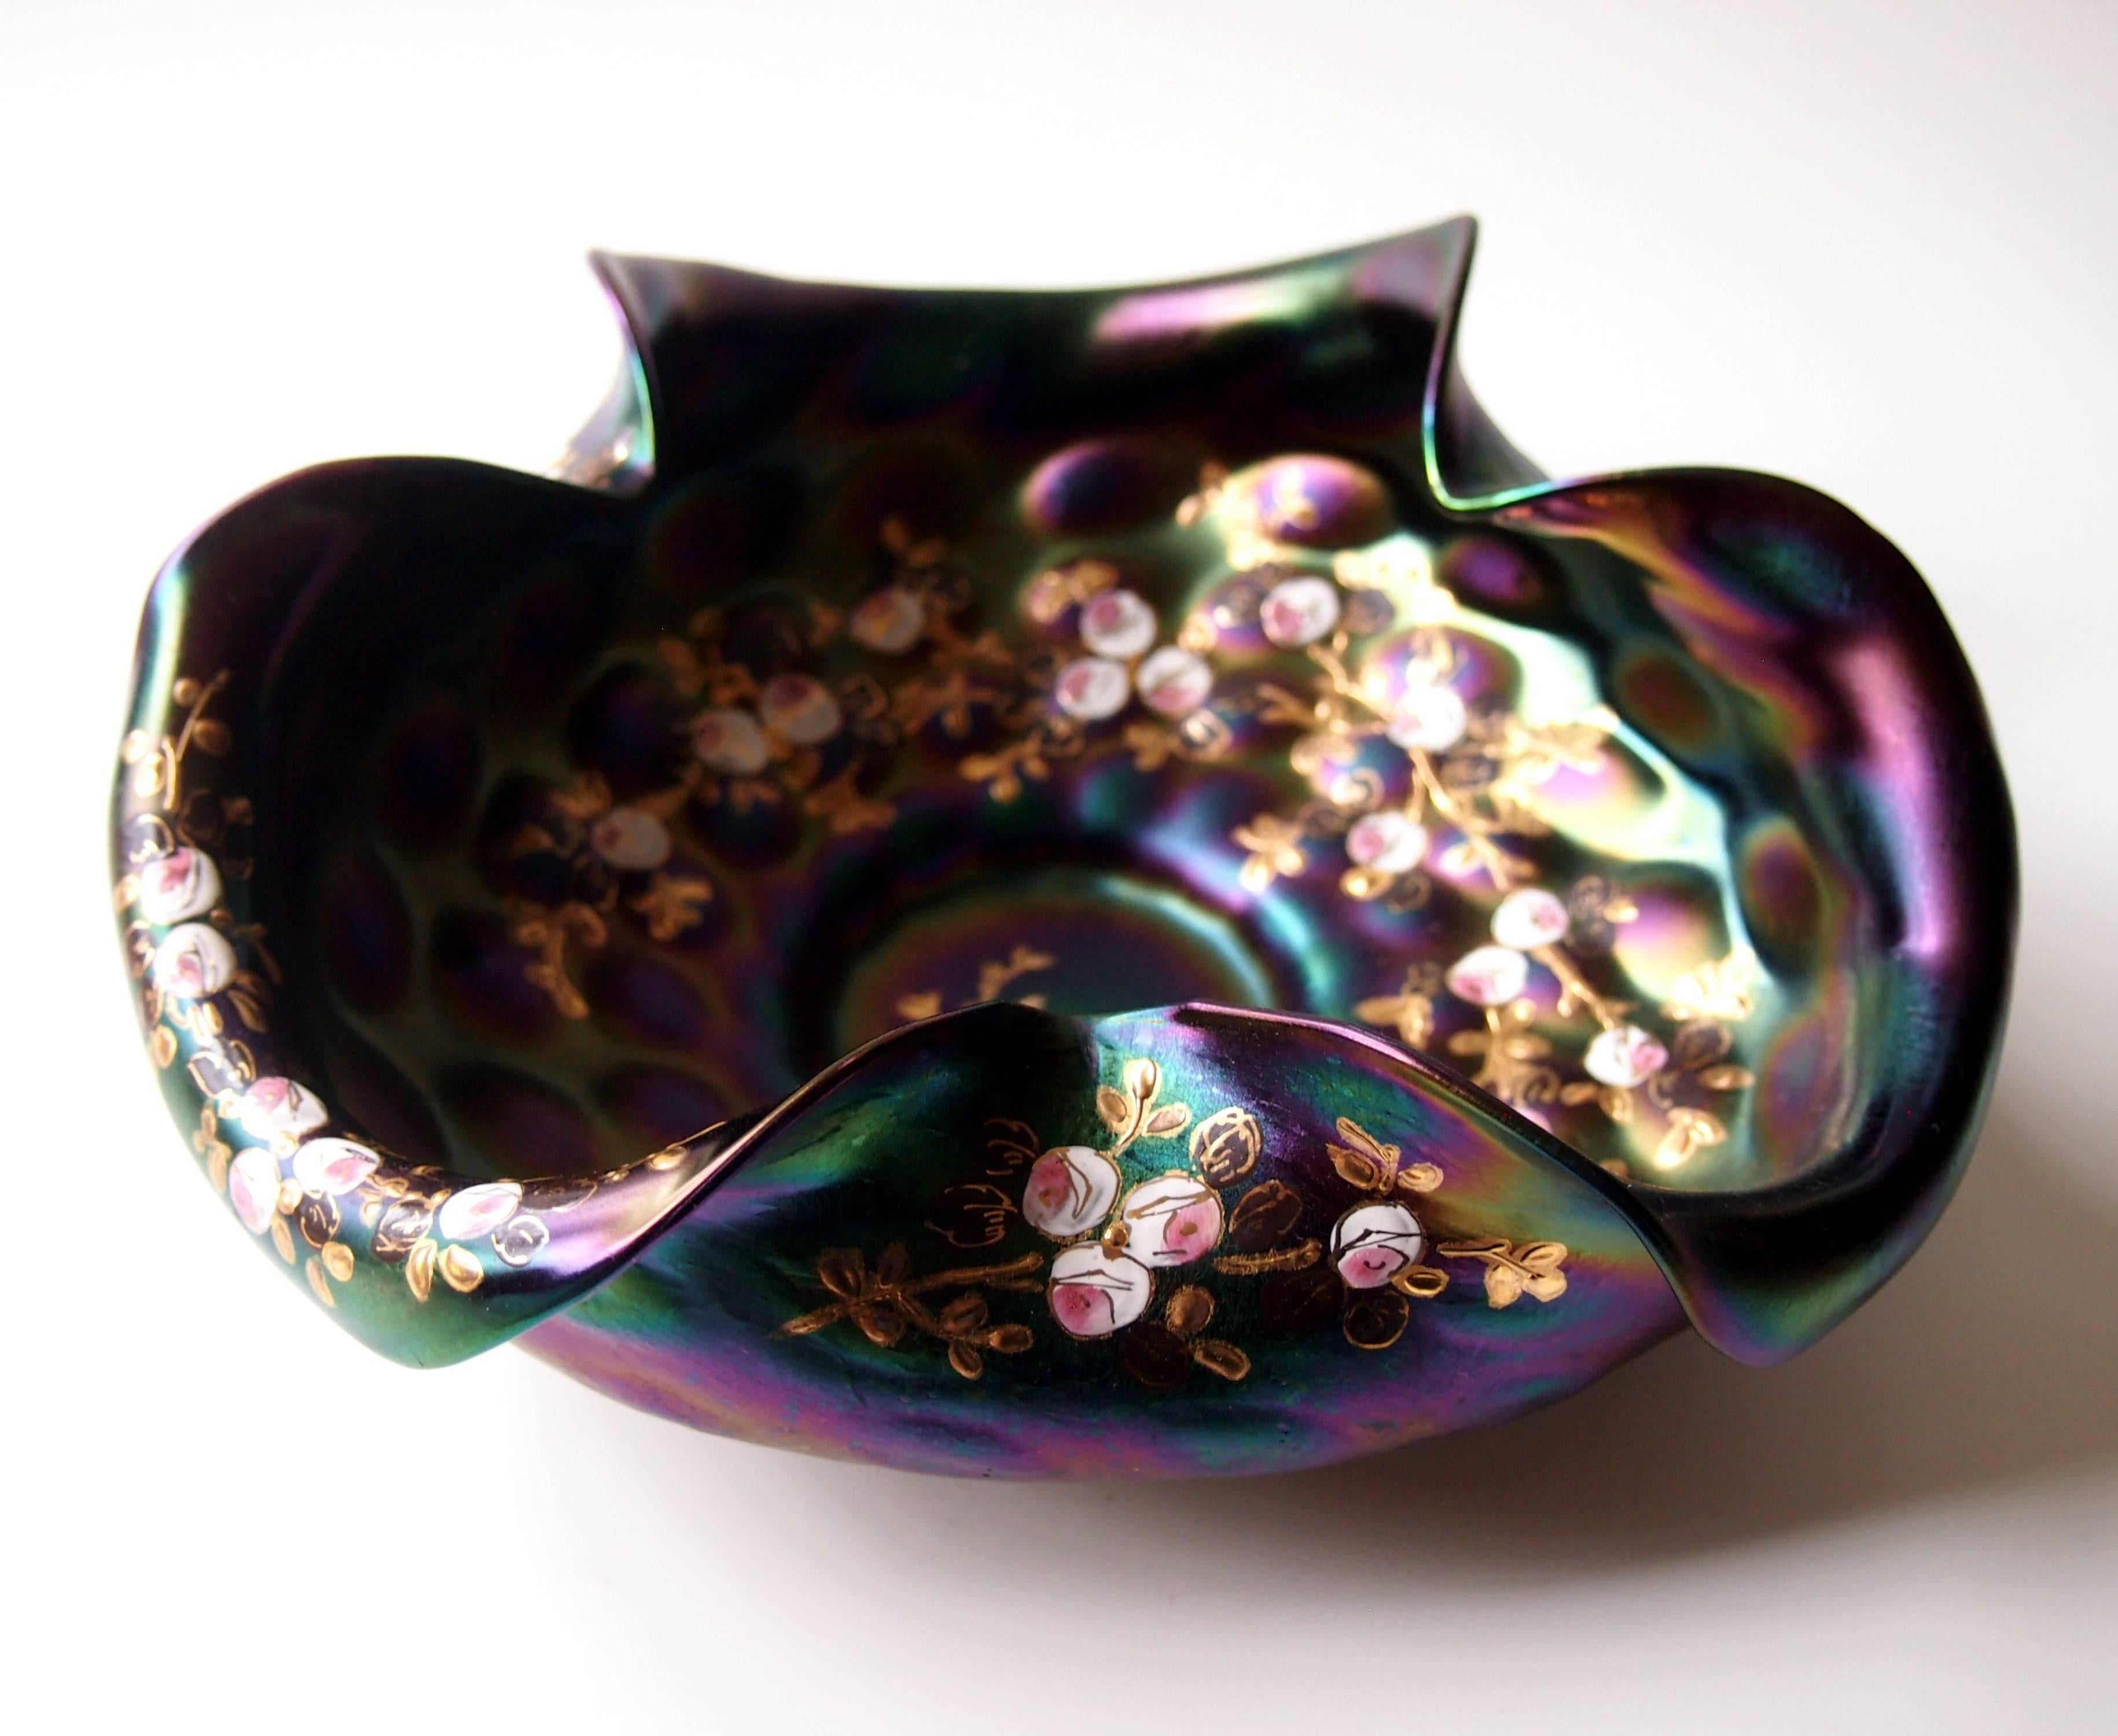 Fine Rindskopf enameled, hand tooled and shaped Jugendstil open bowl - in a near opaque black iridised color -highlighted with reds, greens, blues and pinks -enameled and gilded on the edges and interior with flowers.

Rindskopf was one of the